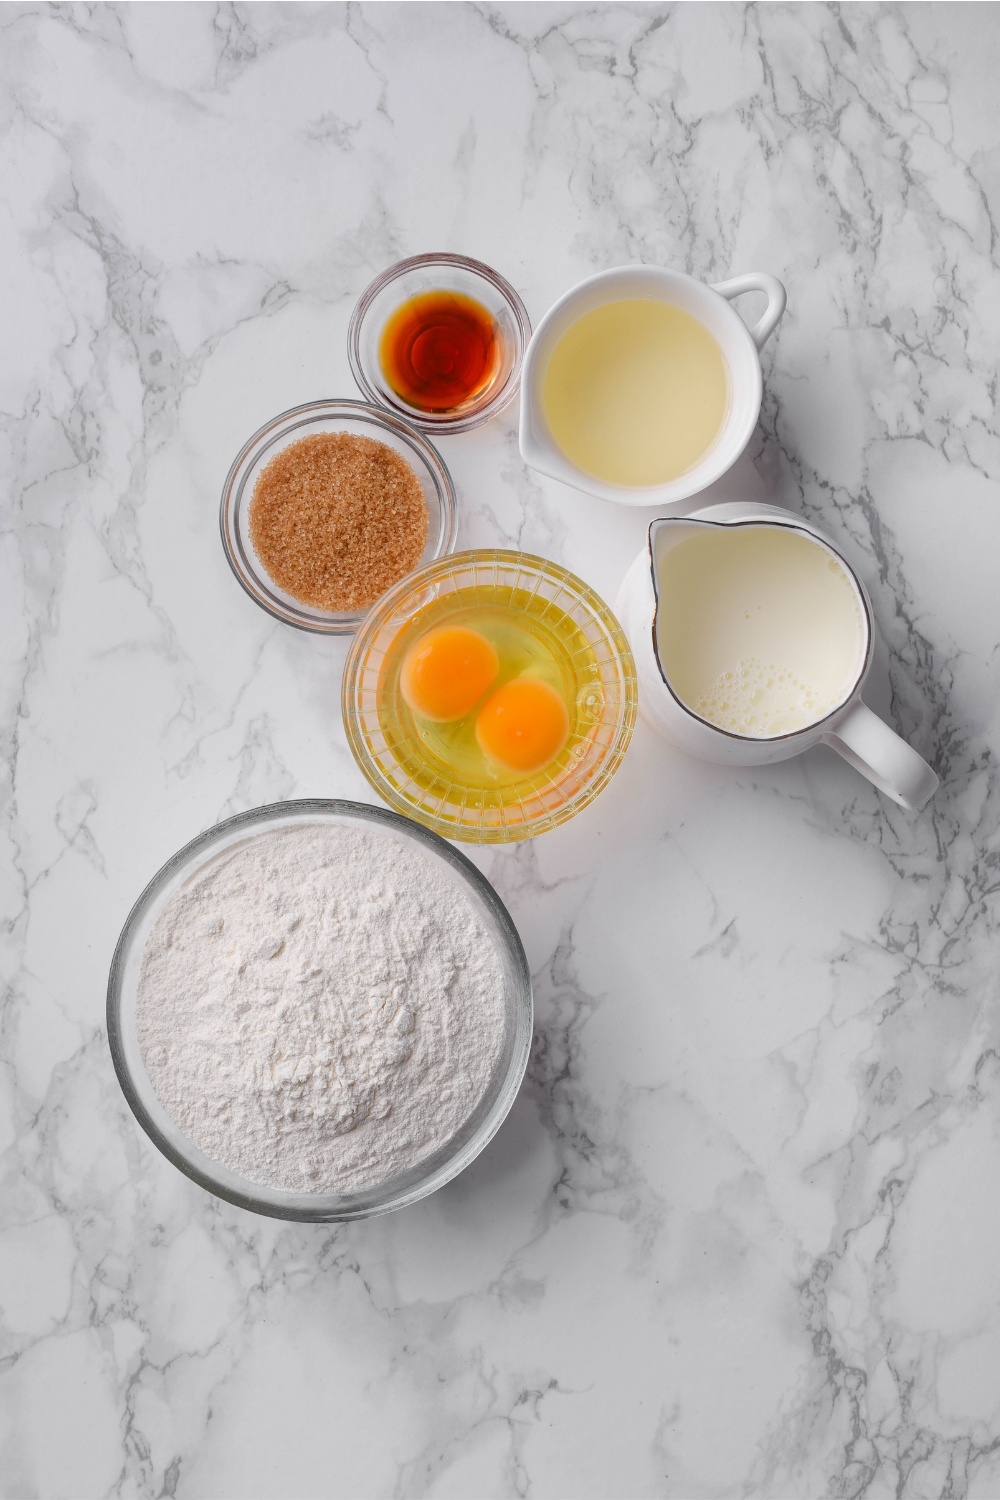 An assortment of ingredients including bowls of flour, unbeaten eggs, vanilla extract, brown sugar, milk, and oil, all on a white marble countertop.